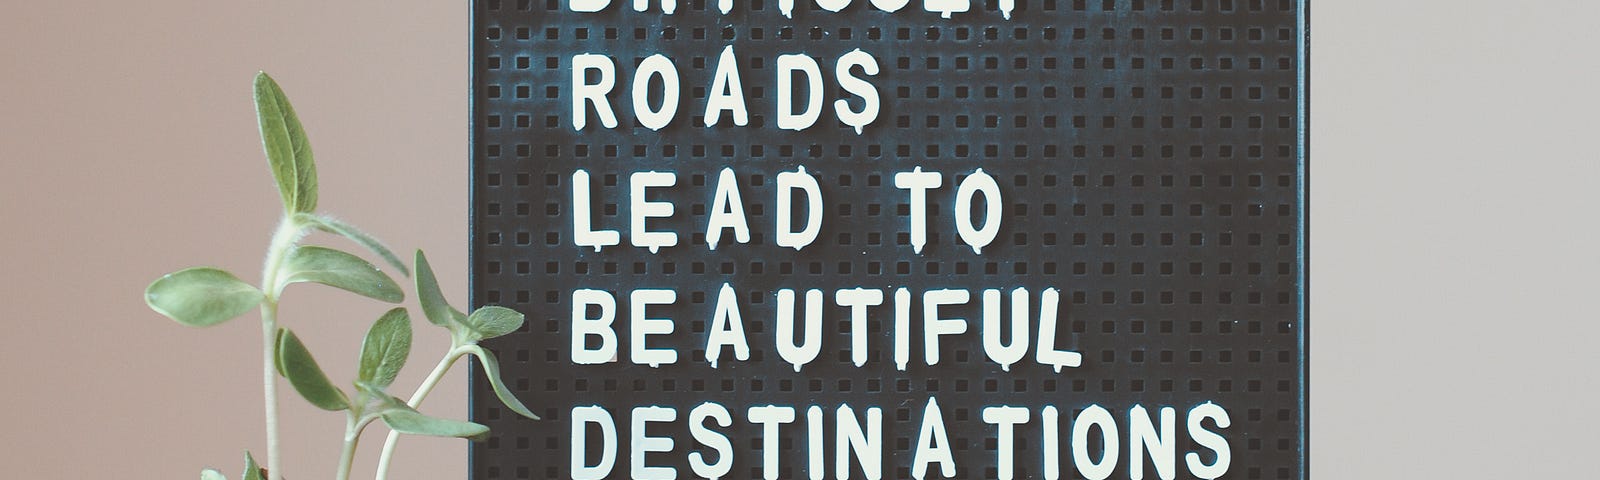 The roads less traveled are more satisfying and fulfilling